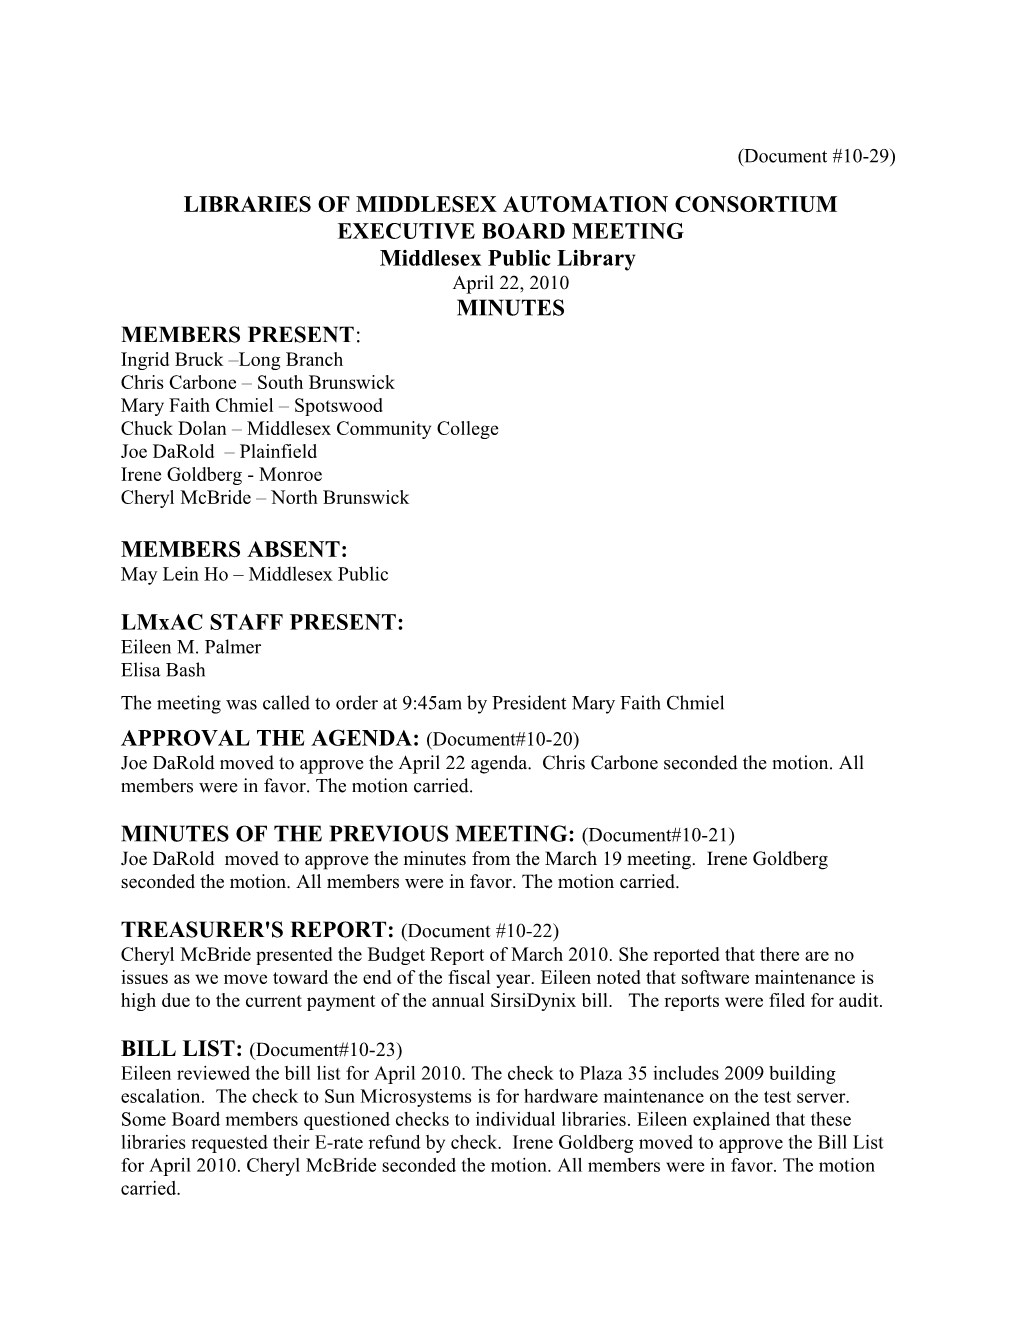 Libraries of Middlesex Automation Consortium s2